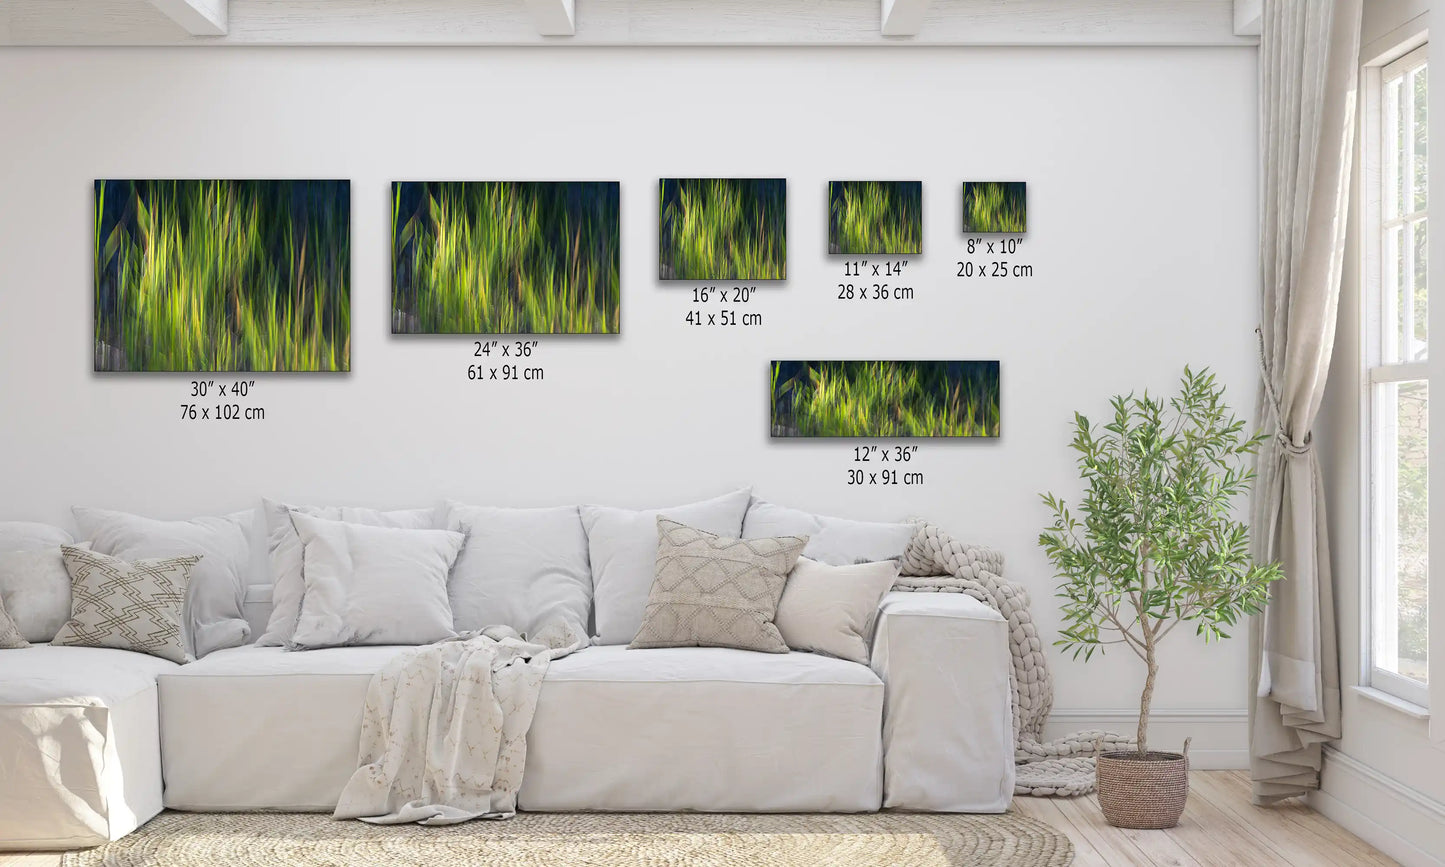 Various sizes of green abstract wall art displayed over a couch, demonstrating the scale from smallest (8"x10") to largest (30"x40"), all with the same energetic green and yellow strokes.